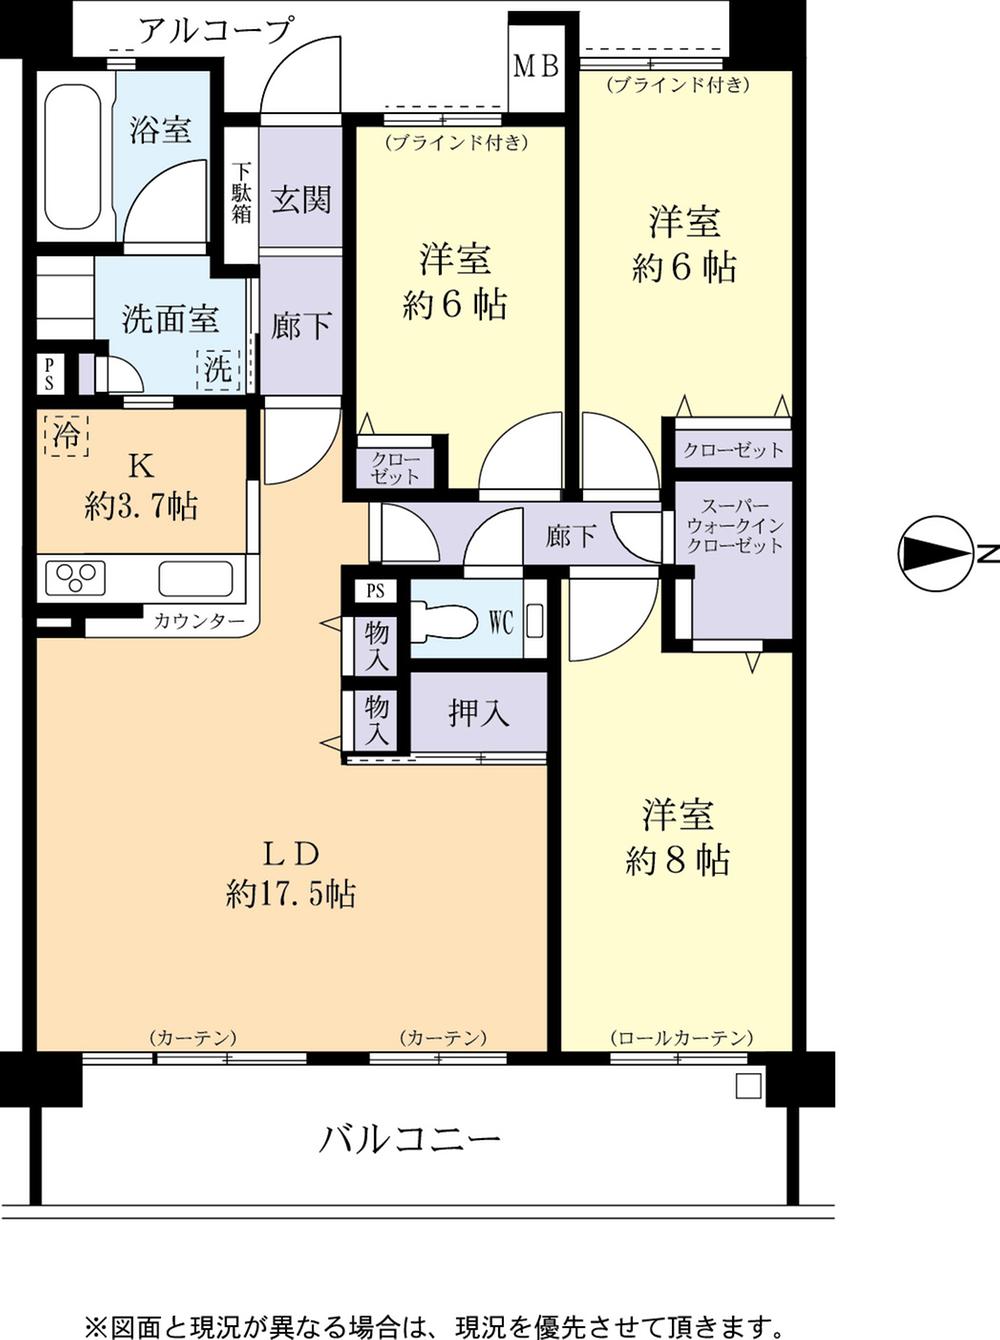 Floor plan. 3LDK + S (storeroom), Price 24,800,000 yen, Footprint 90.9 sq m , There is no balcony area 15 sq m Japanese-style room. Living and has become an integral!